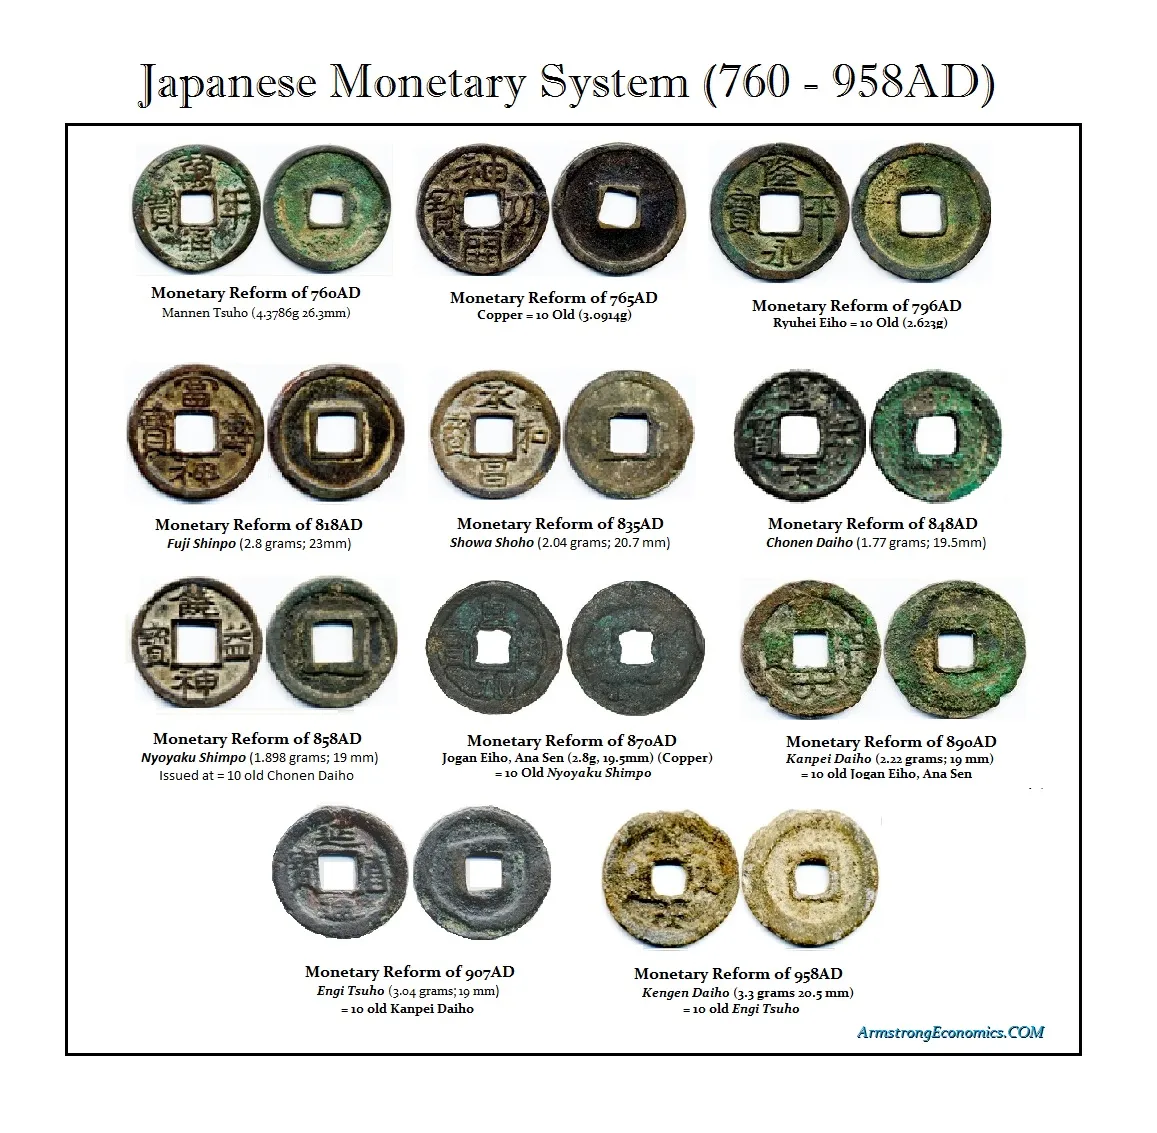 Moneys systems. Драгметаллов. The monetary System. The catalog of Japanese Coins Shin kanei Tsuho. Eiho Grade 1 made in Japan.